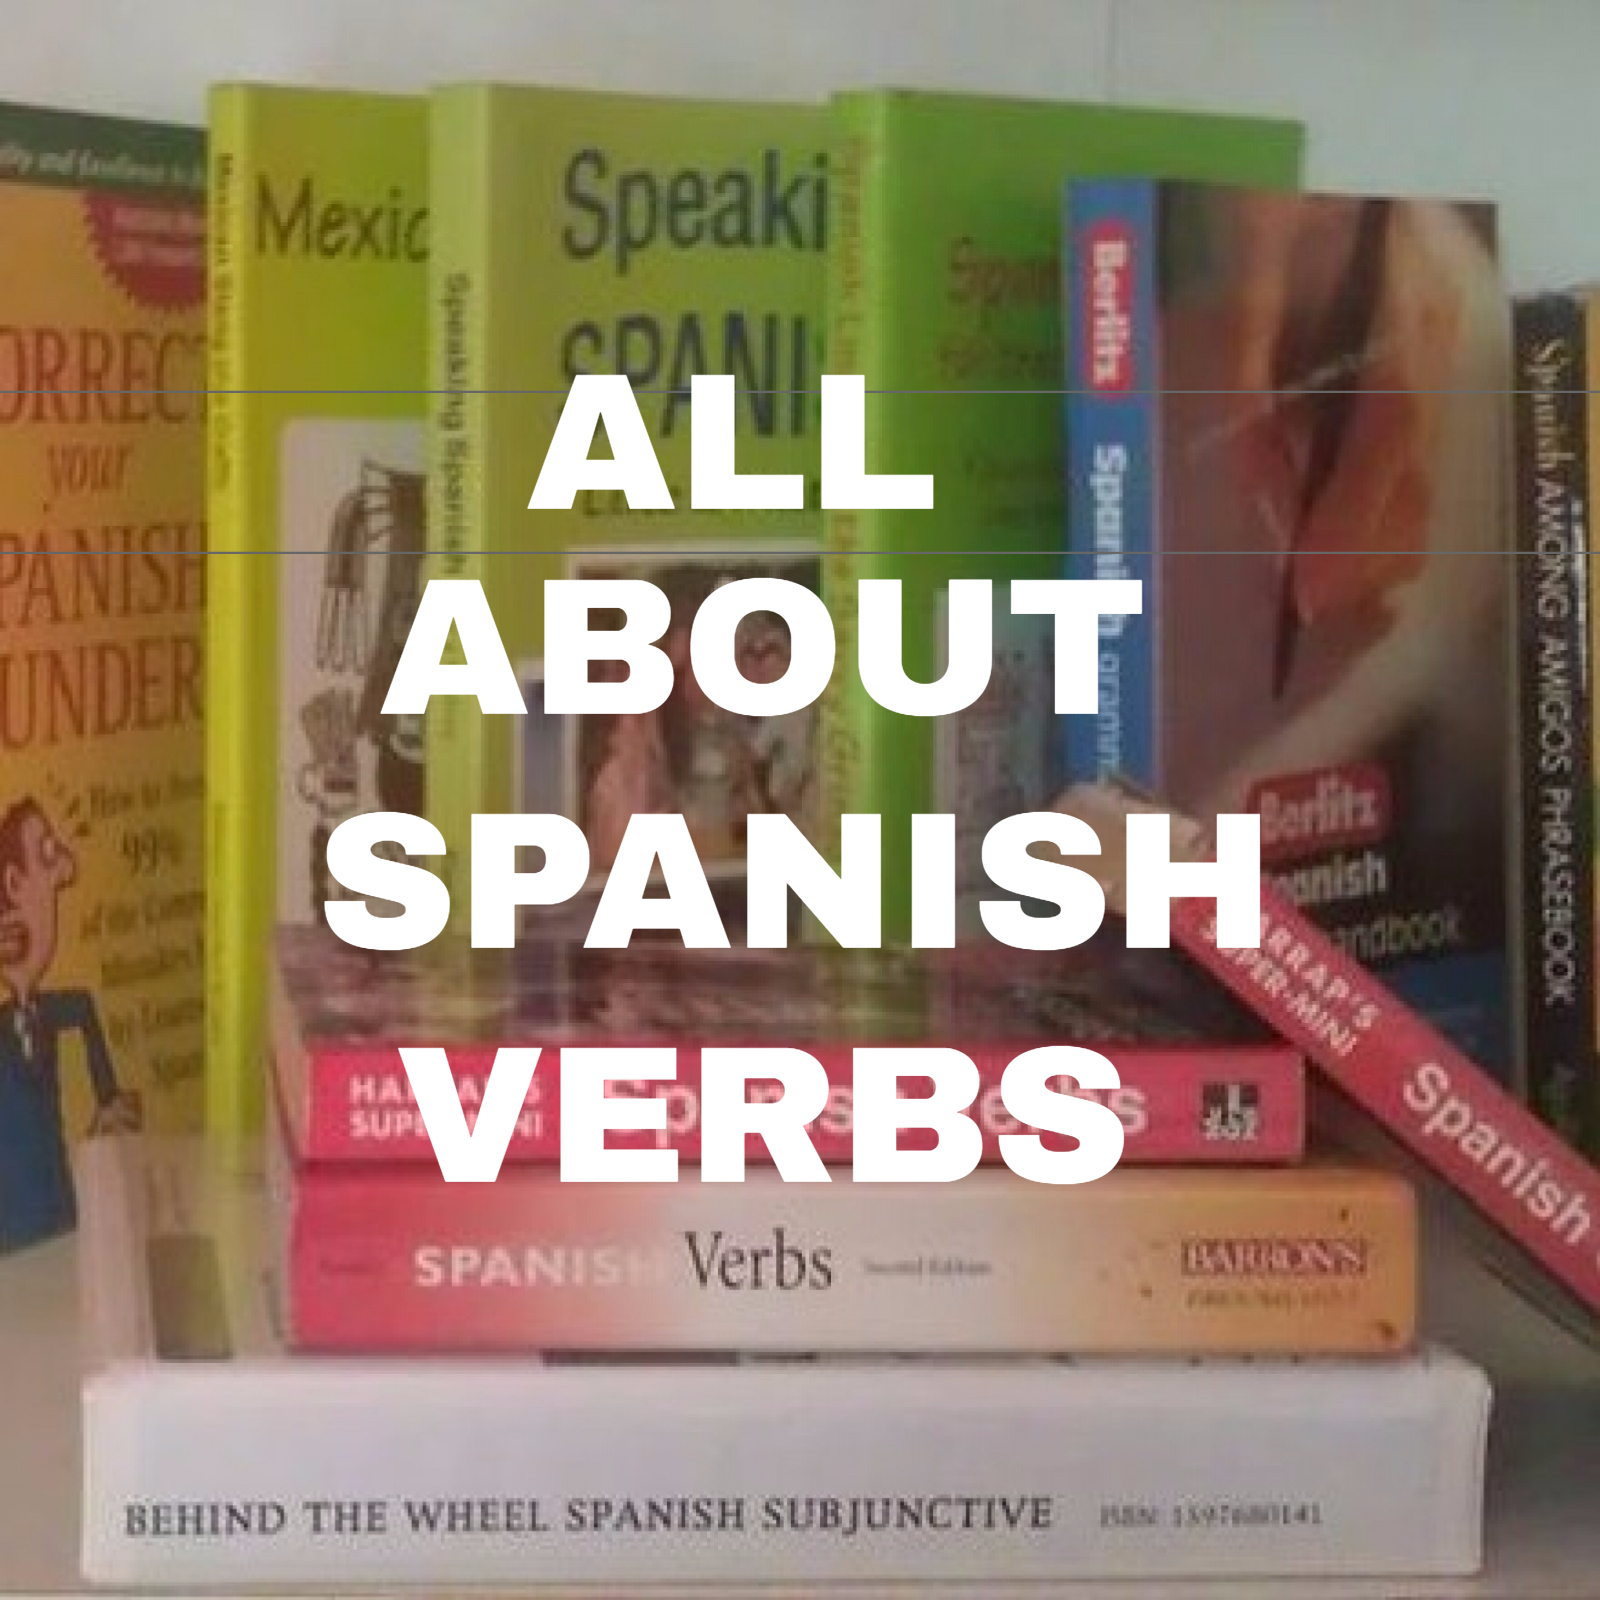 All About Spanish Verbs Podcast artwork